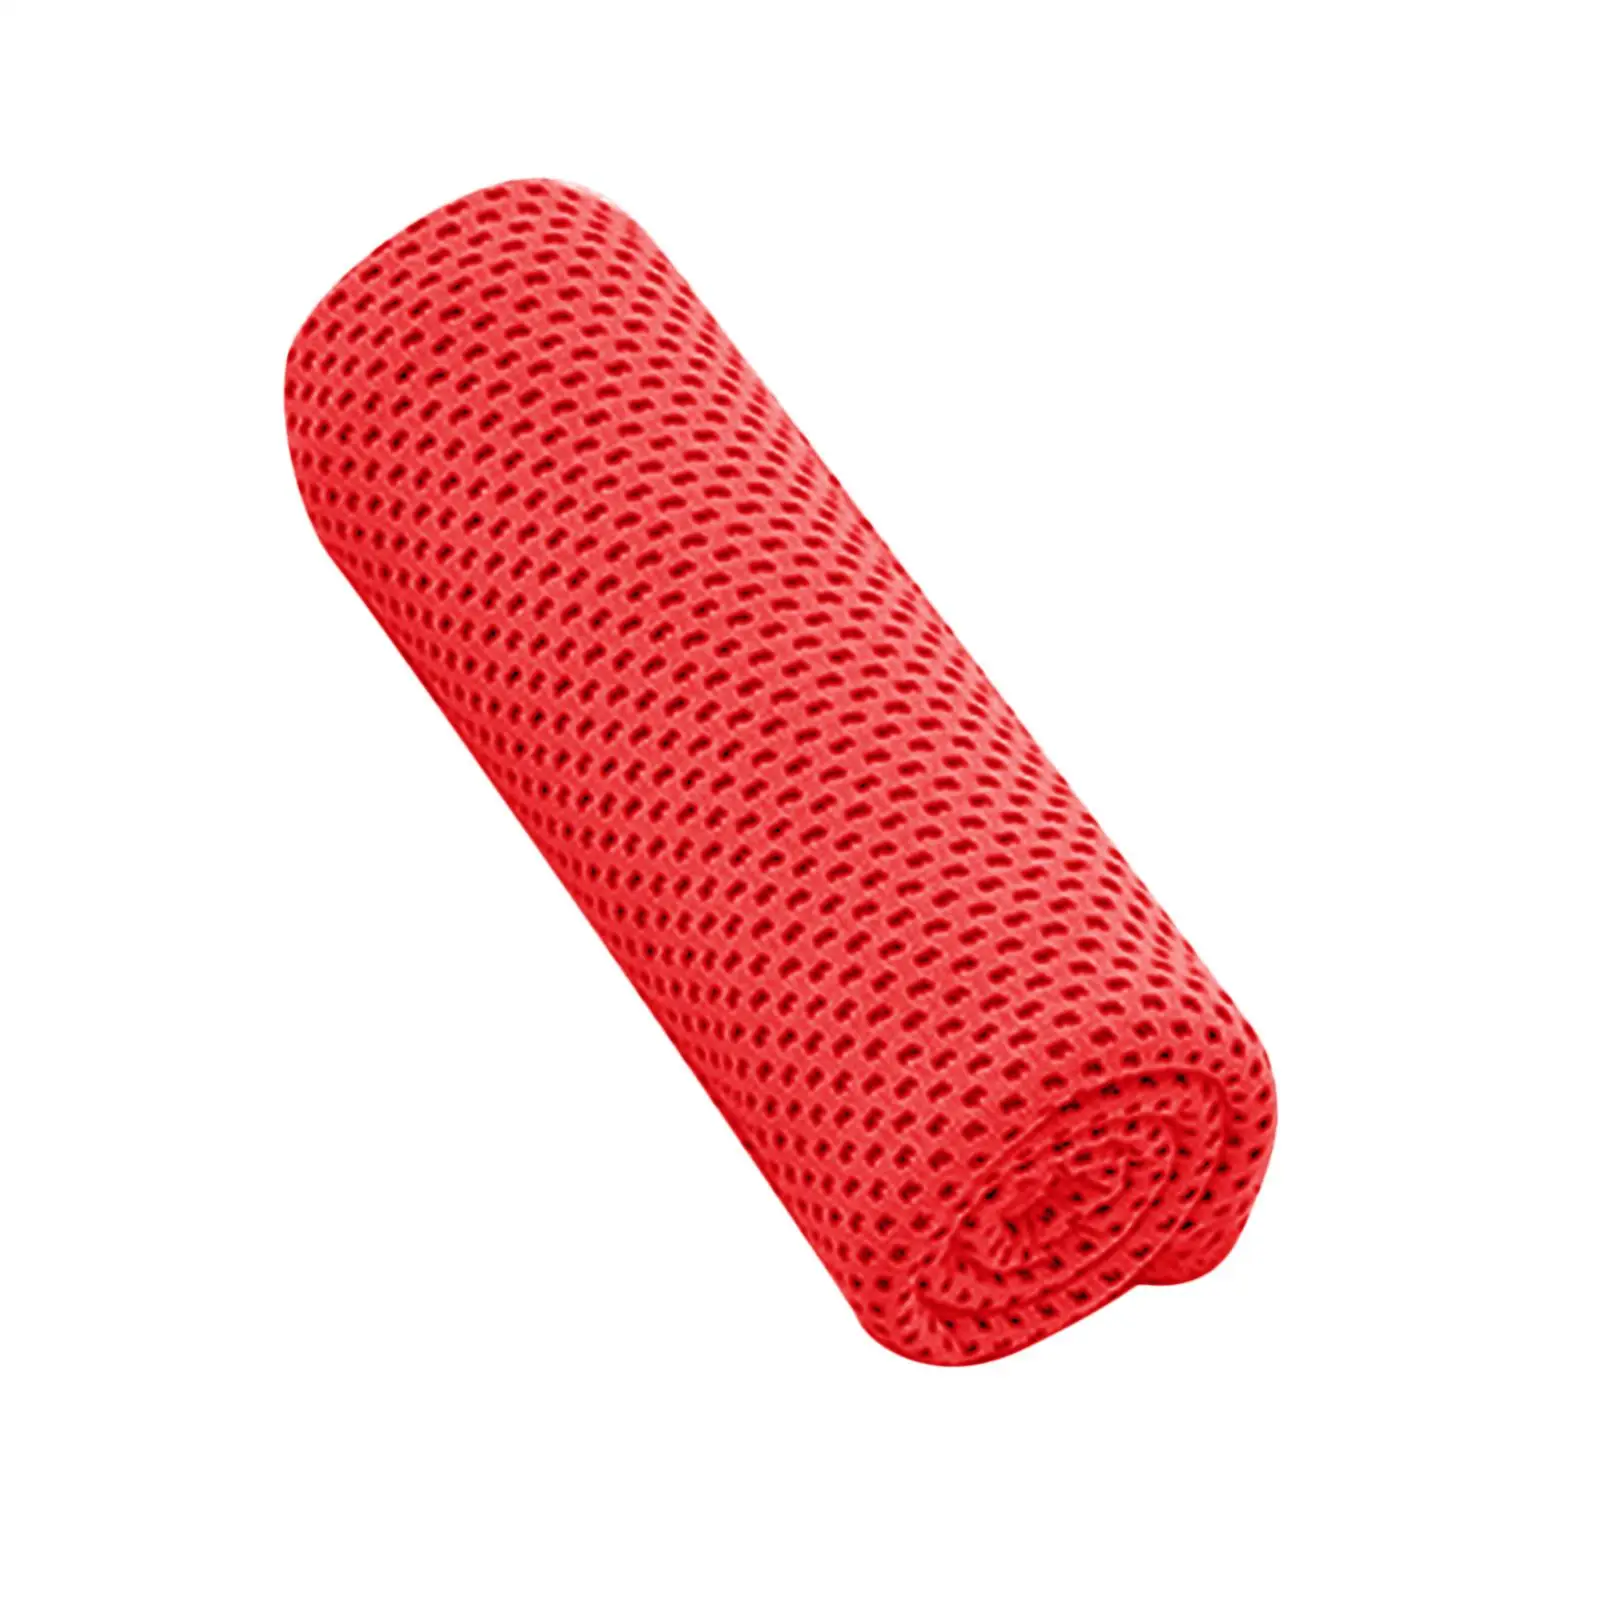 Cooling Towel Quick Dry for Neck and Face Breathable Chilly Towel Cool Towel for Running Camping Hiking Basketball Jogging